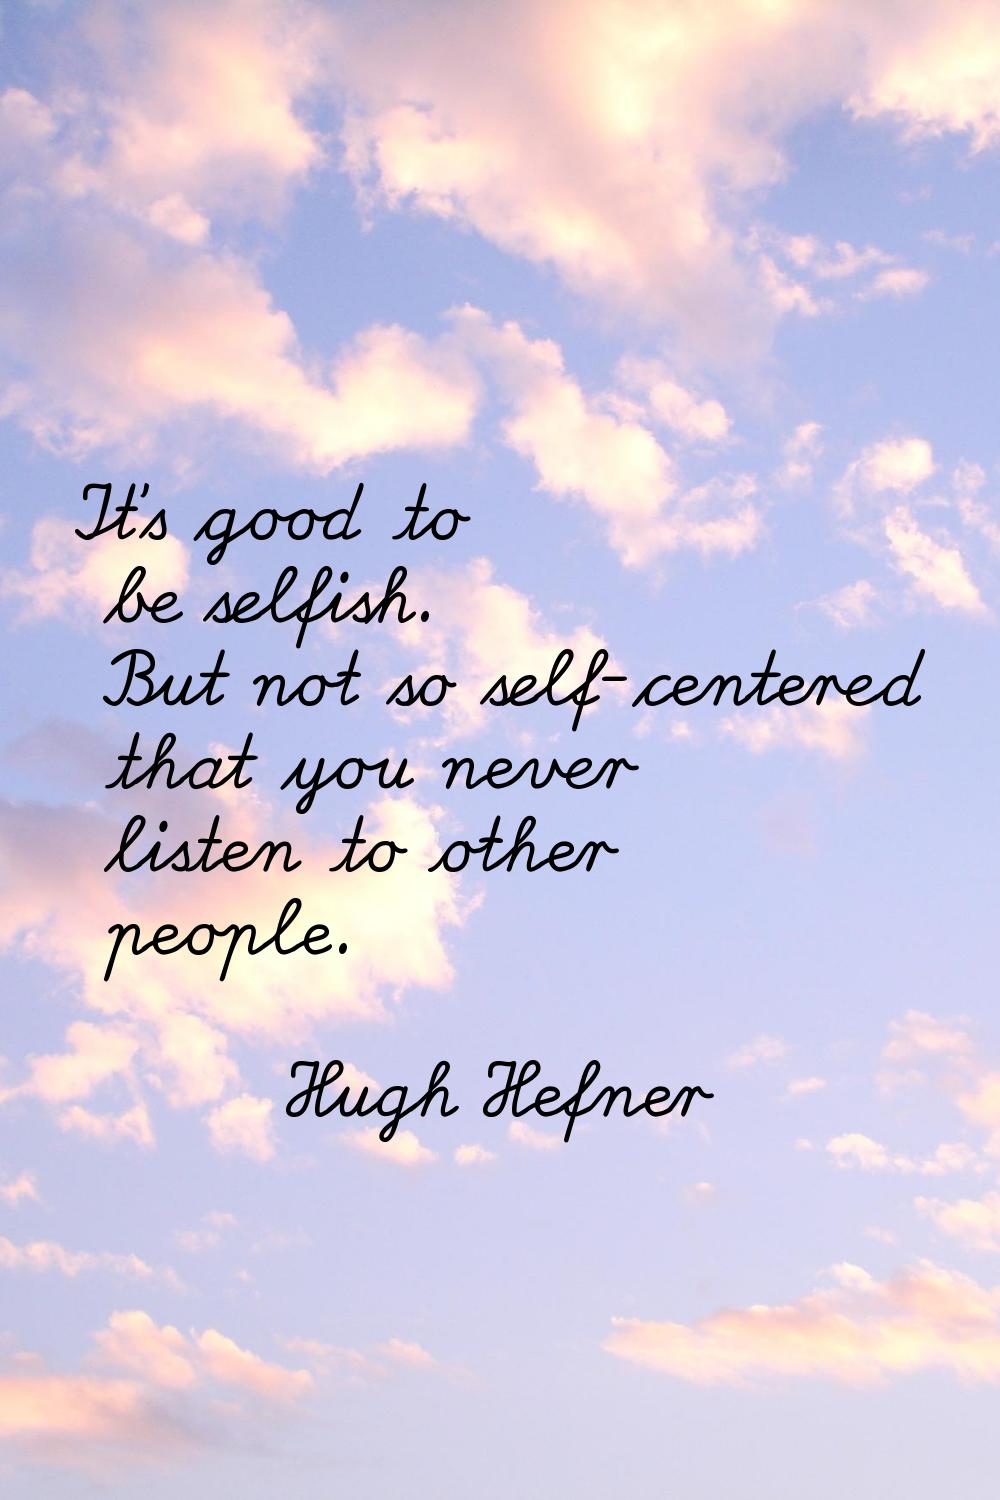 It's good to be selfish. But not so self-centered that you never listen to other people.